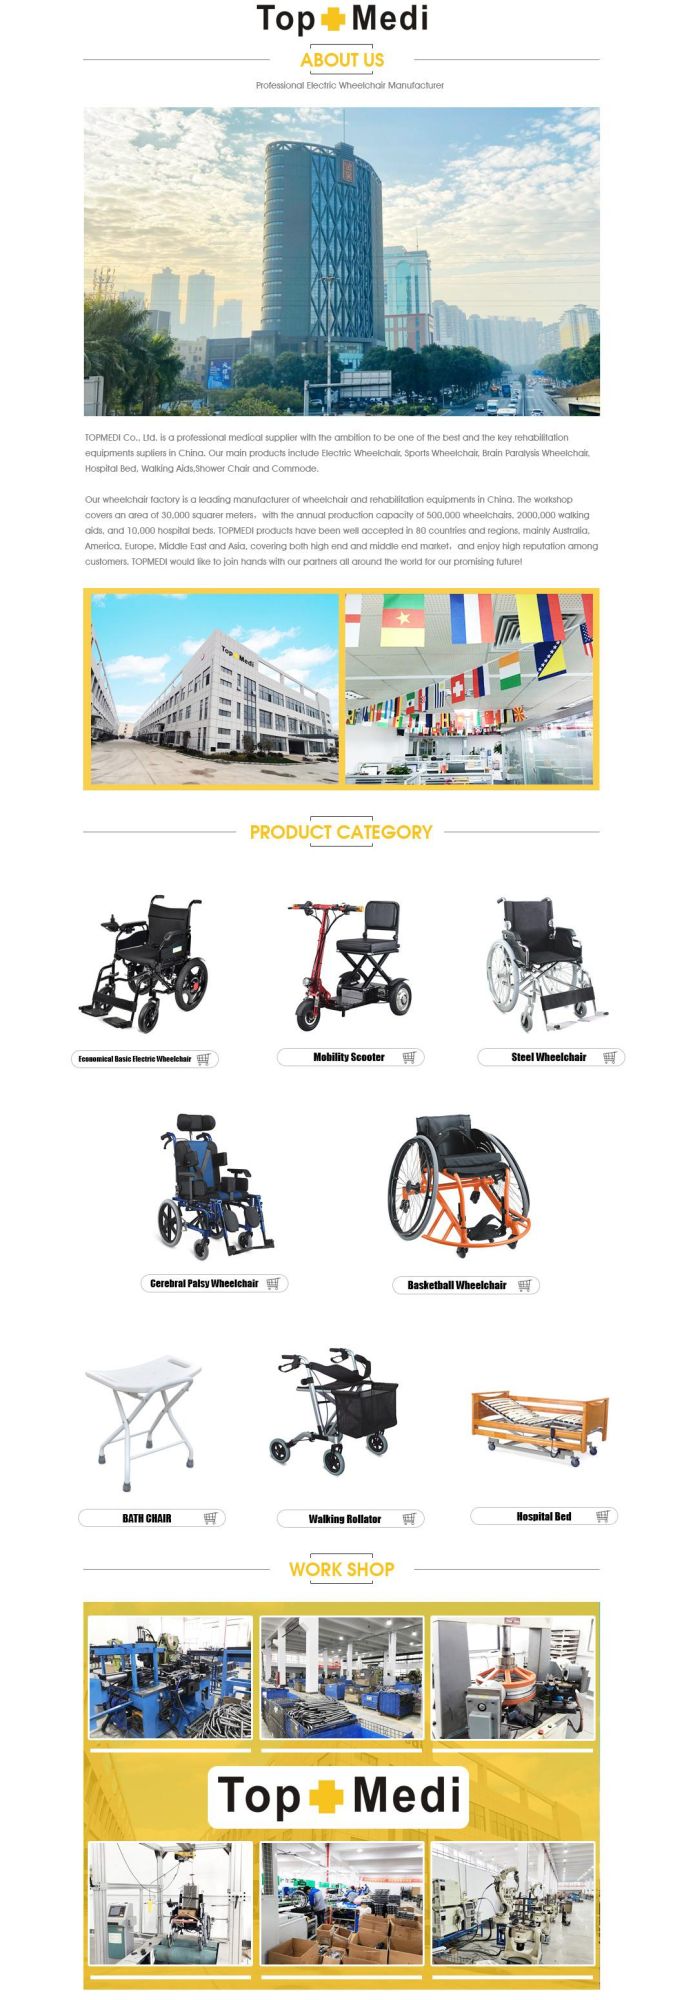 Rollators Walkers Cart Walking Aids Canes Aid Shoes Handle Wheelchair Fes Walk Aide